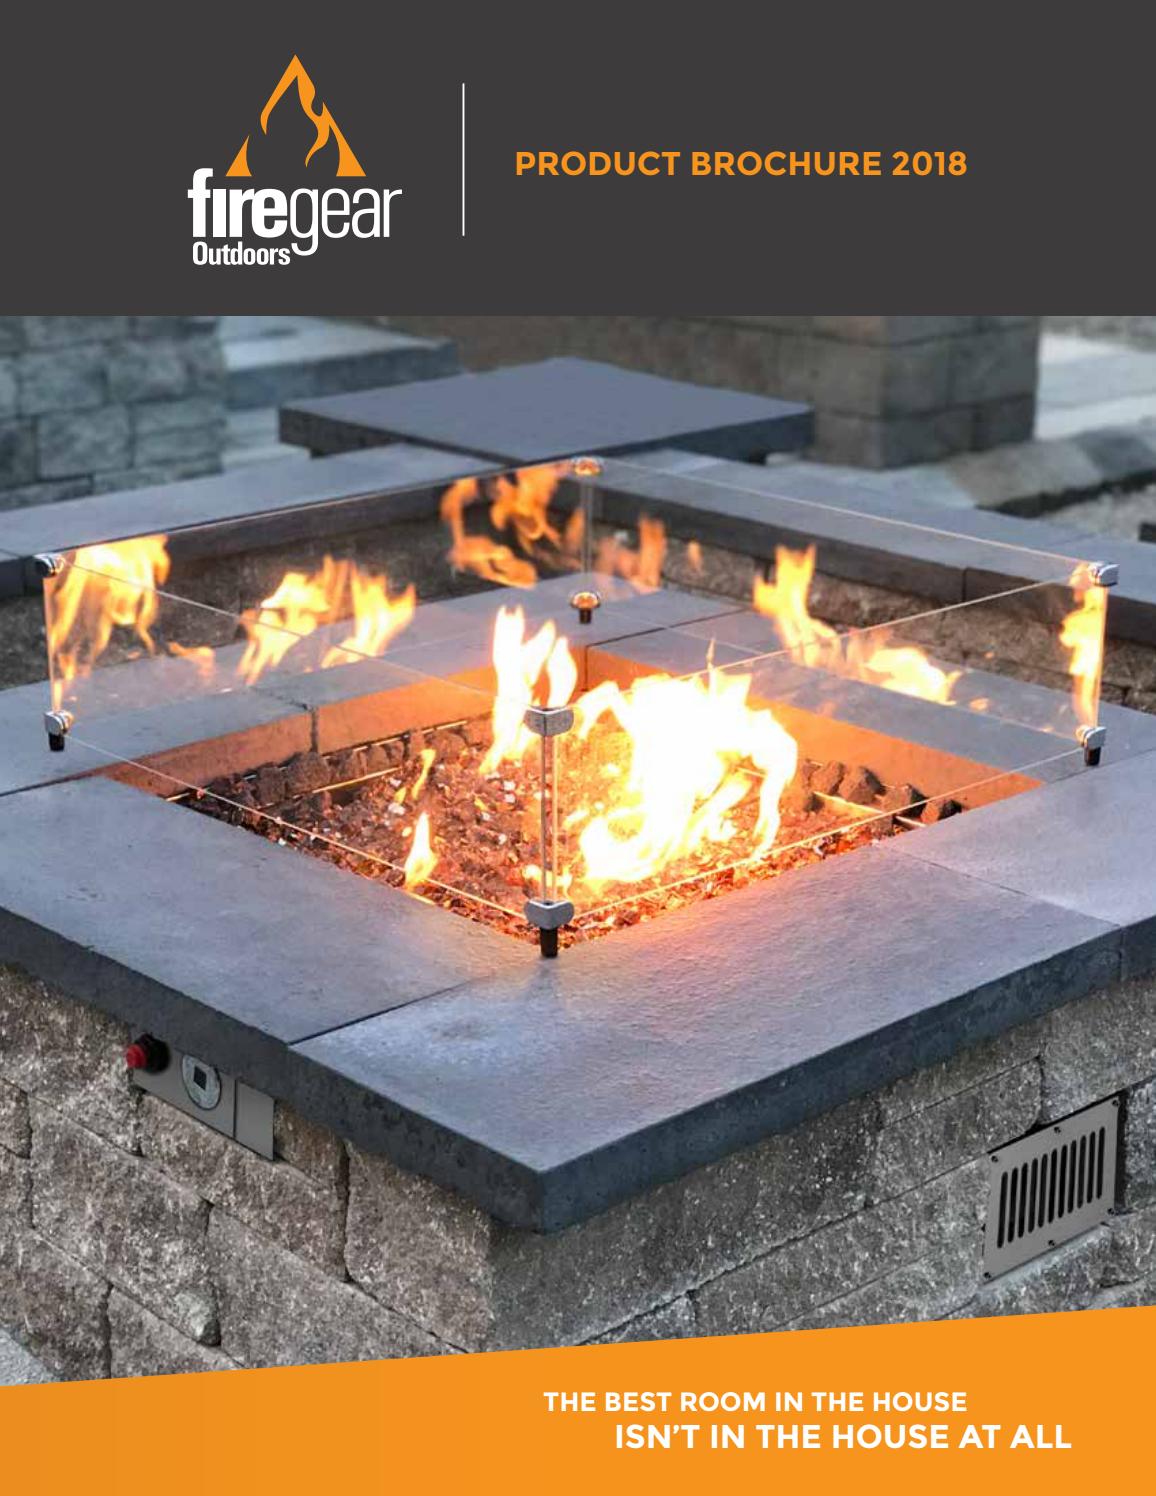 How to Clean A Gas Fireplace Burner Beautiful Firegear Product Brochure by Skytech Products Group issuu